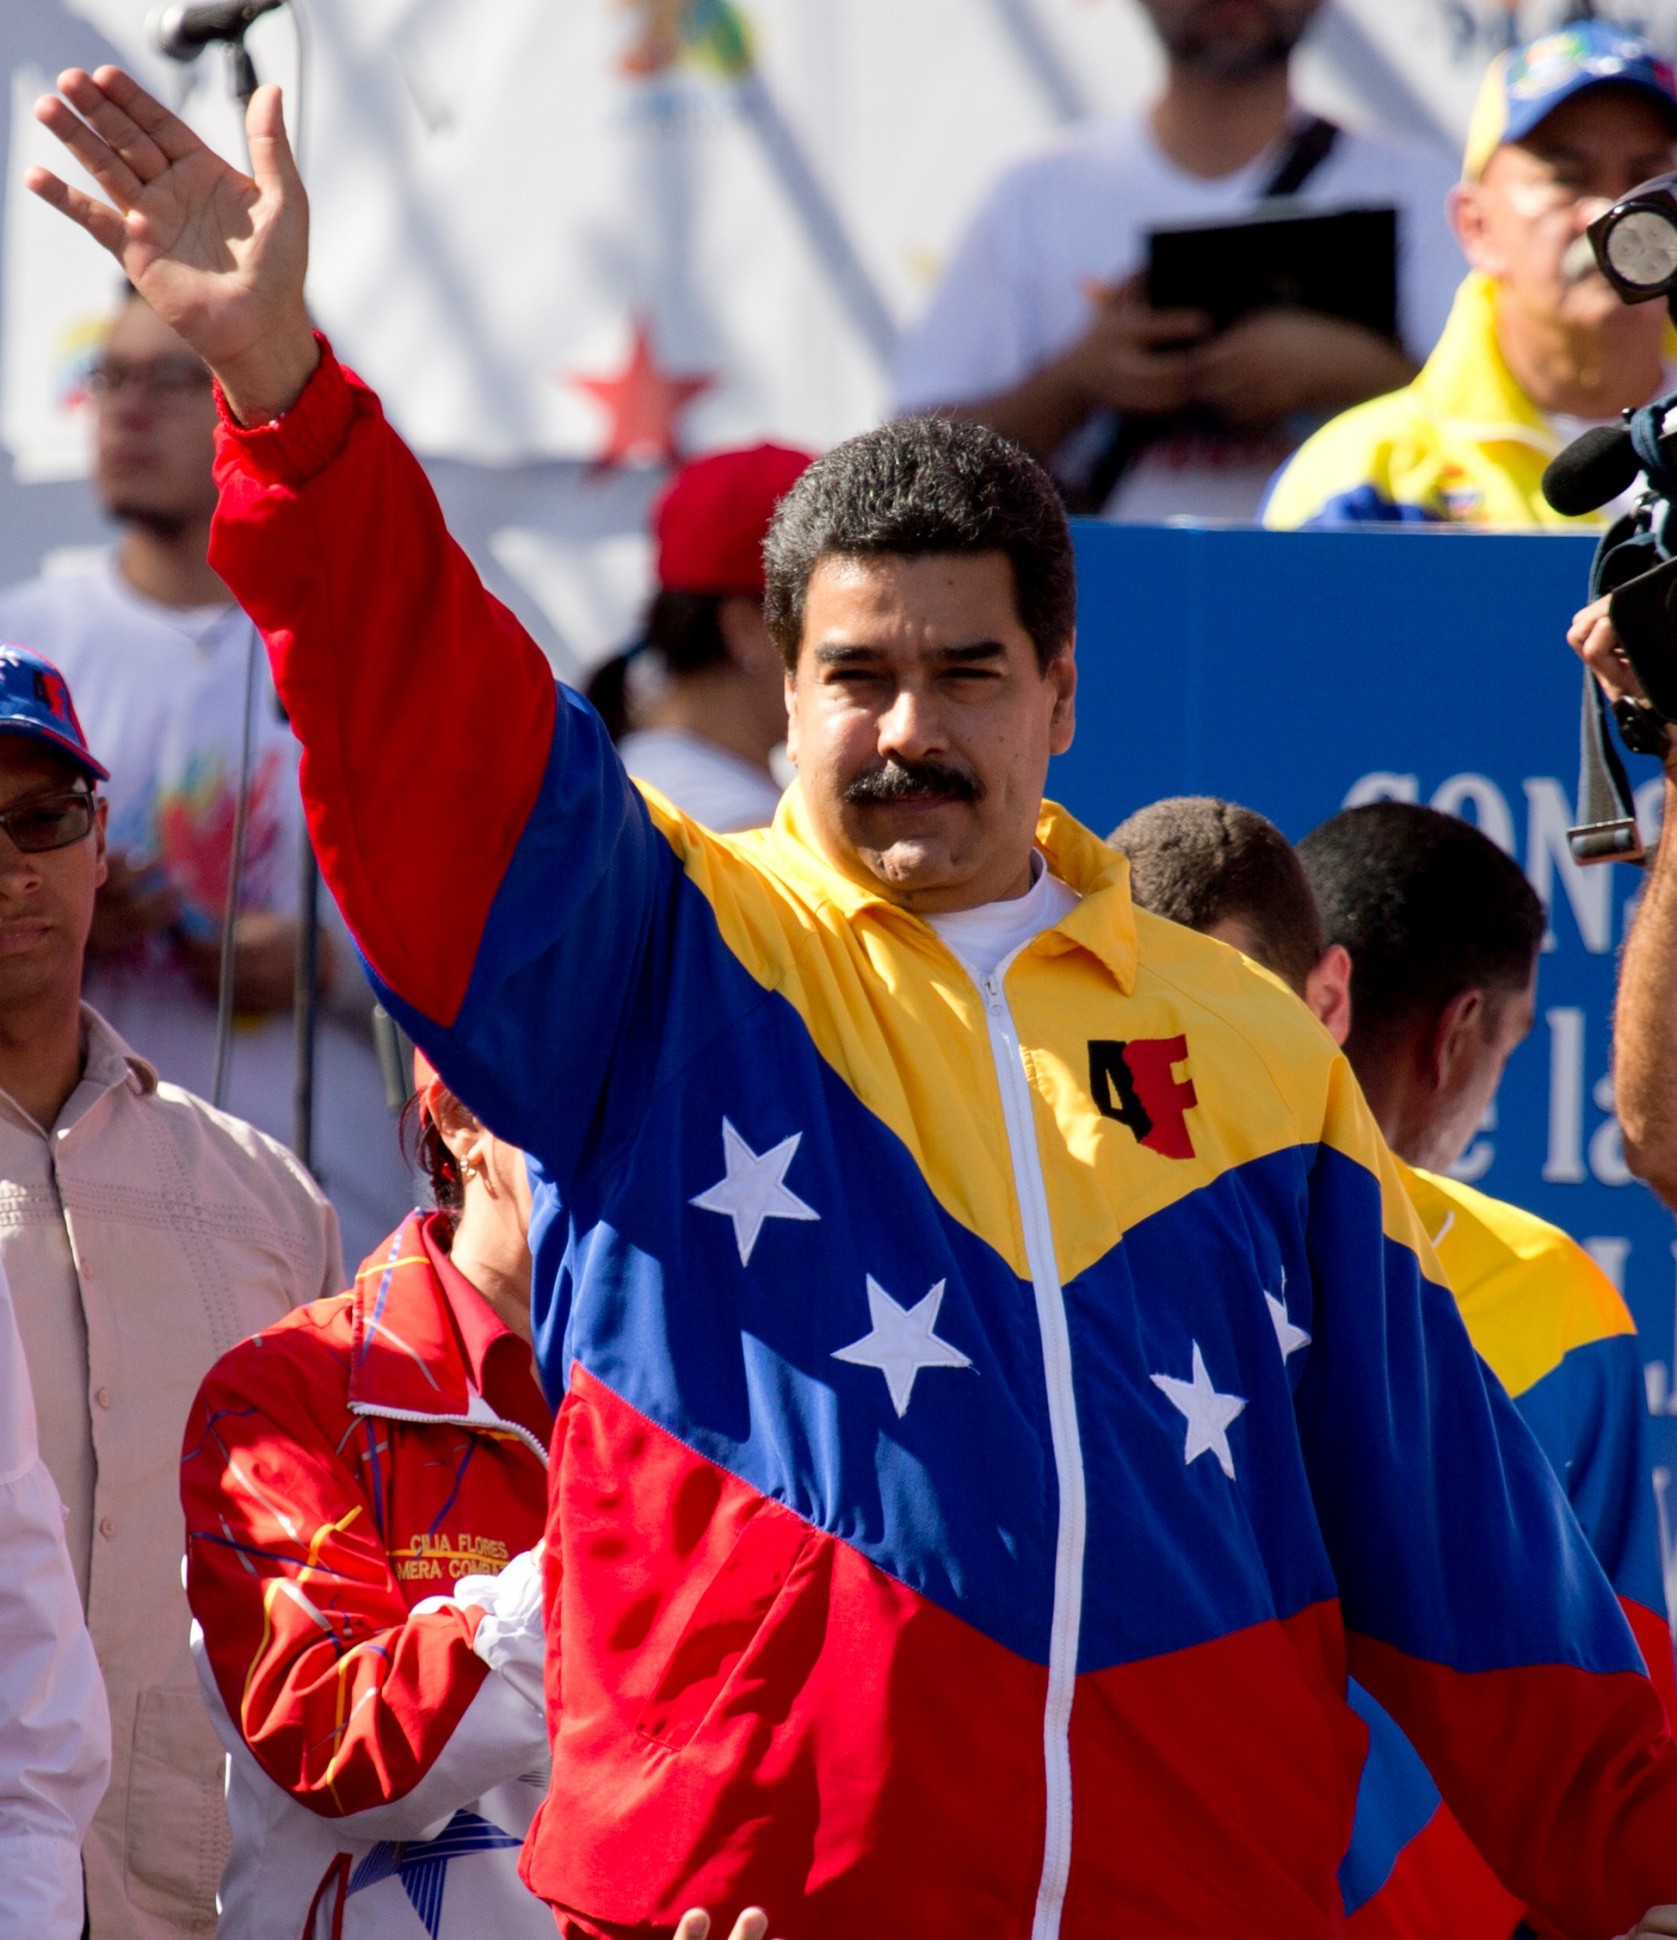 Andrei Serbin Pont – Fire In The Hole: The Imminent Implosion of Venezuelan Chavismo